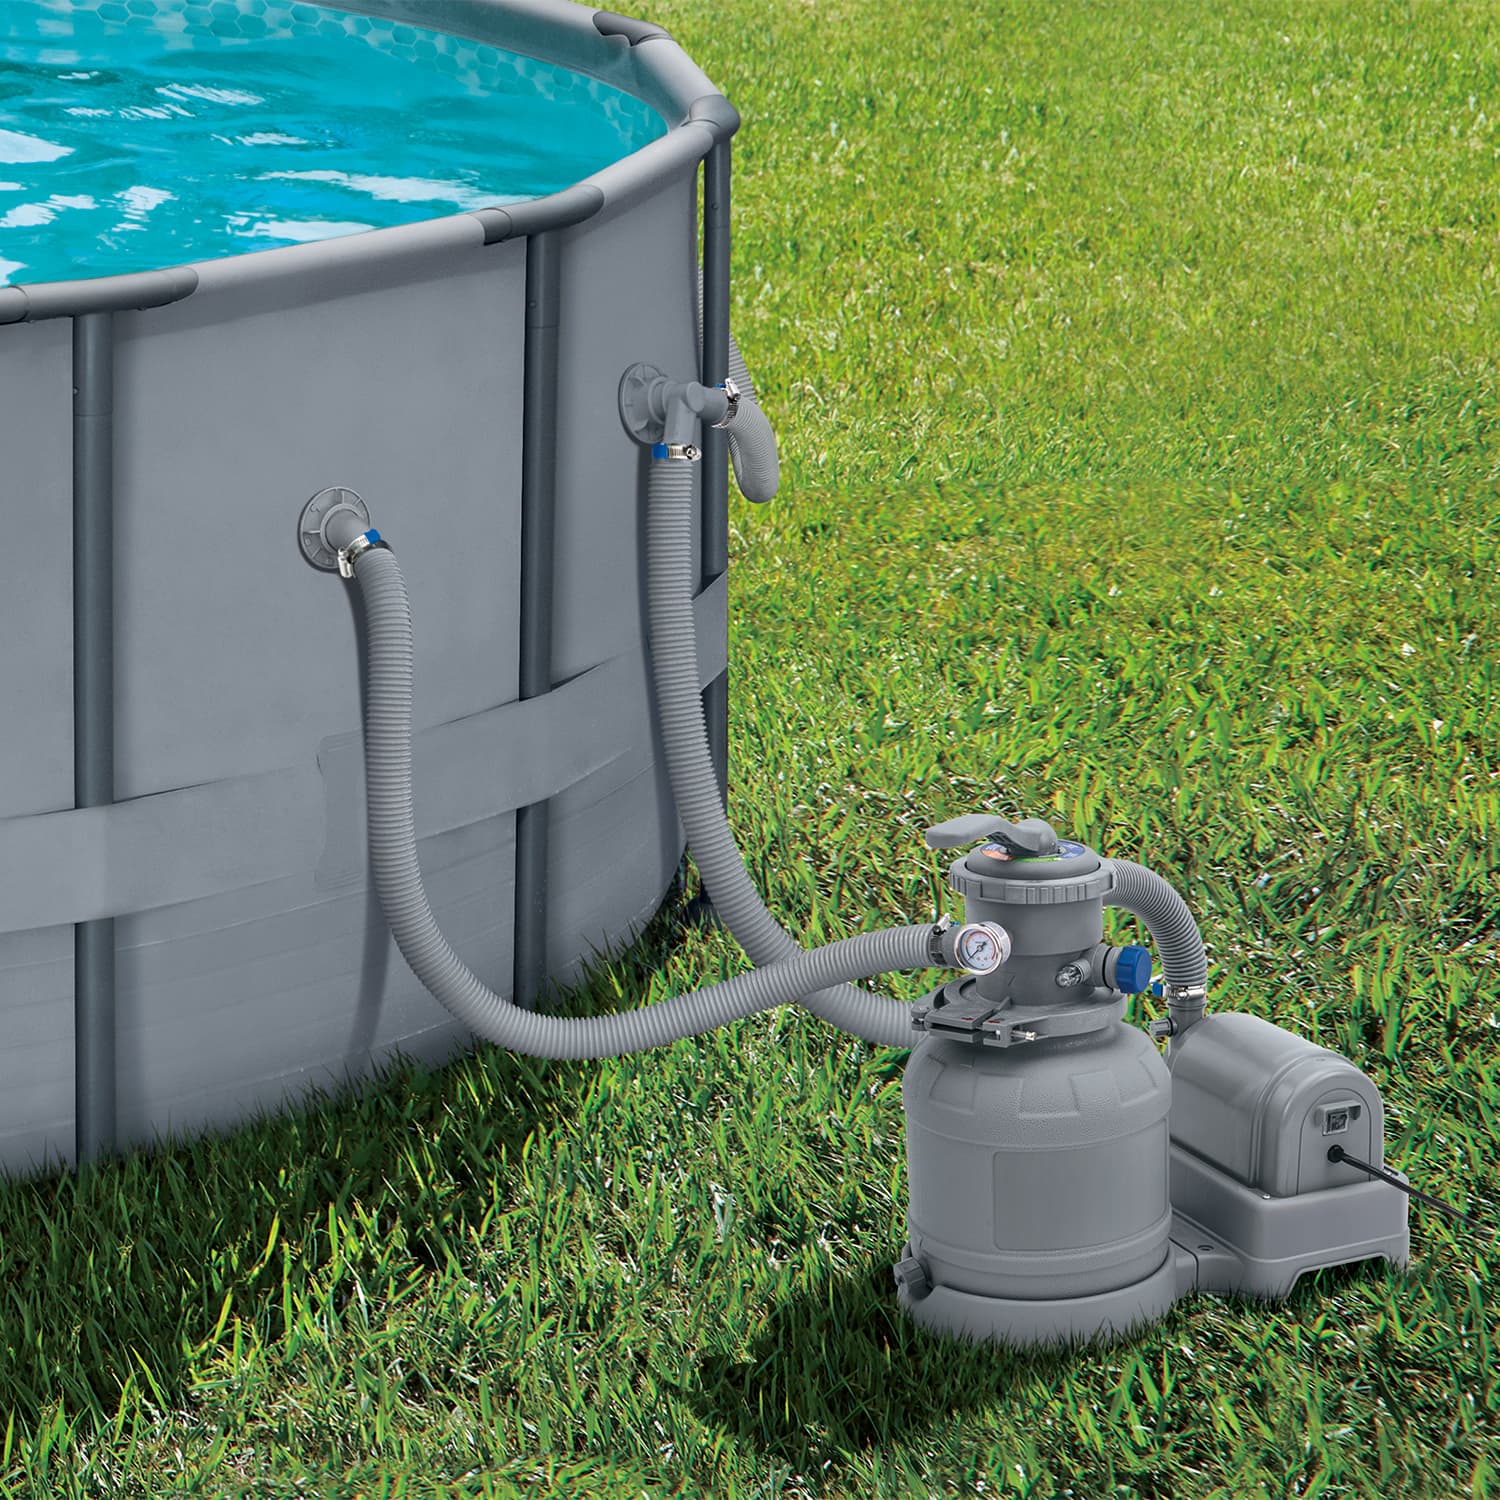 Funsicle 10" Sand Filter Pump attached to Funsicle Oasis Pool on a grass background